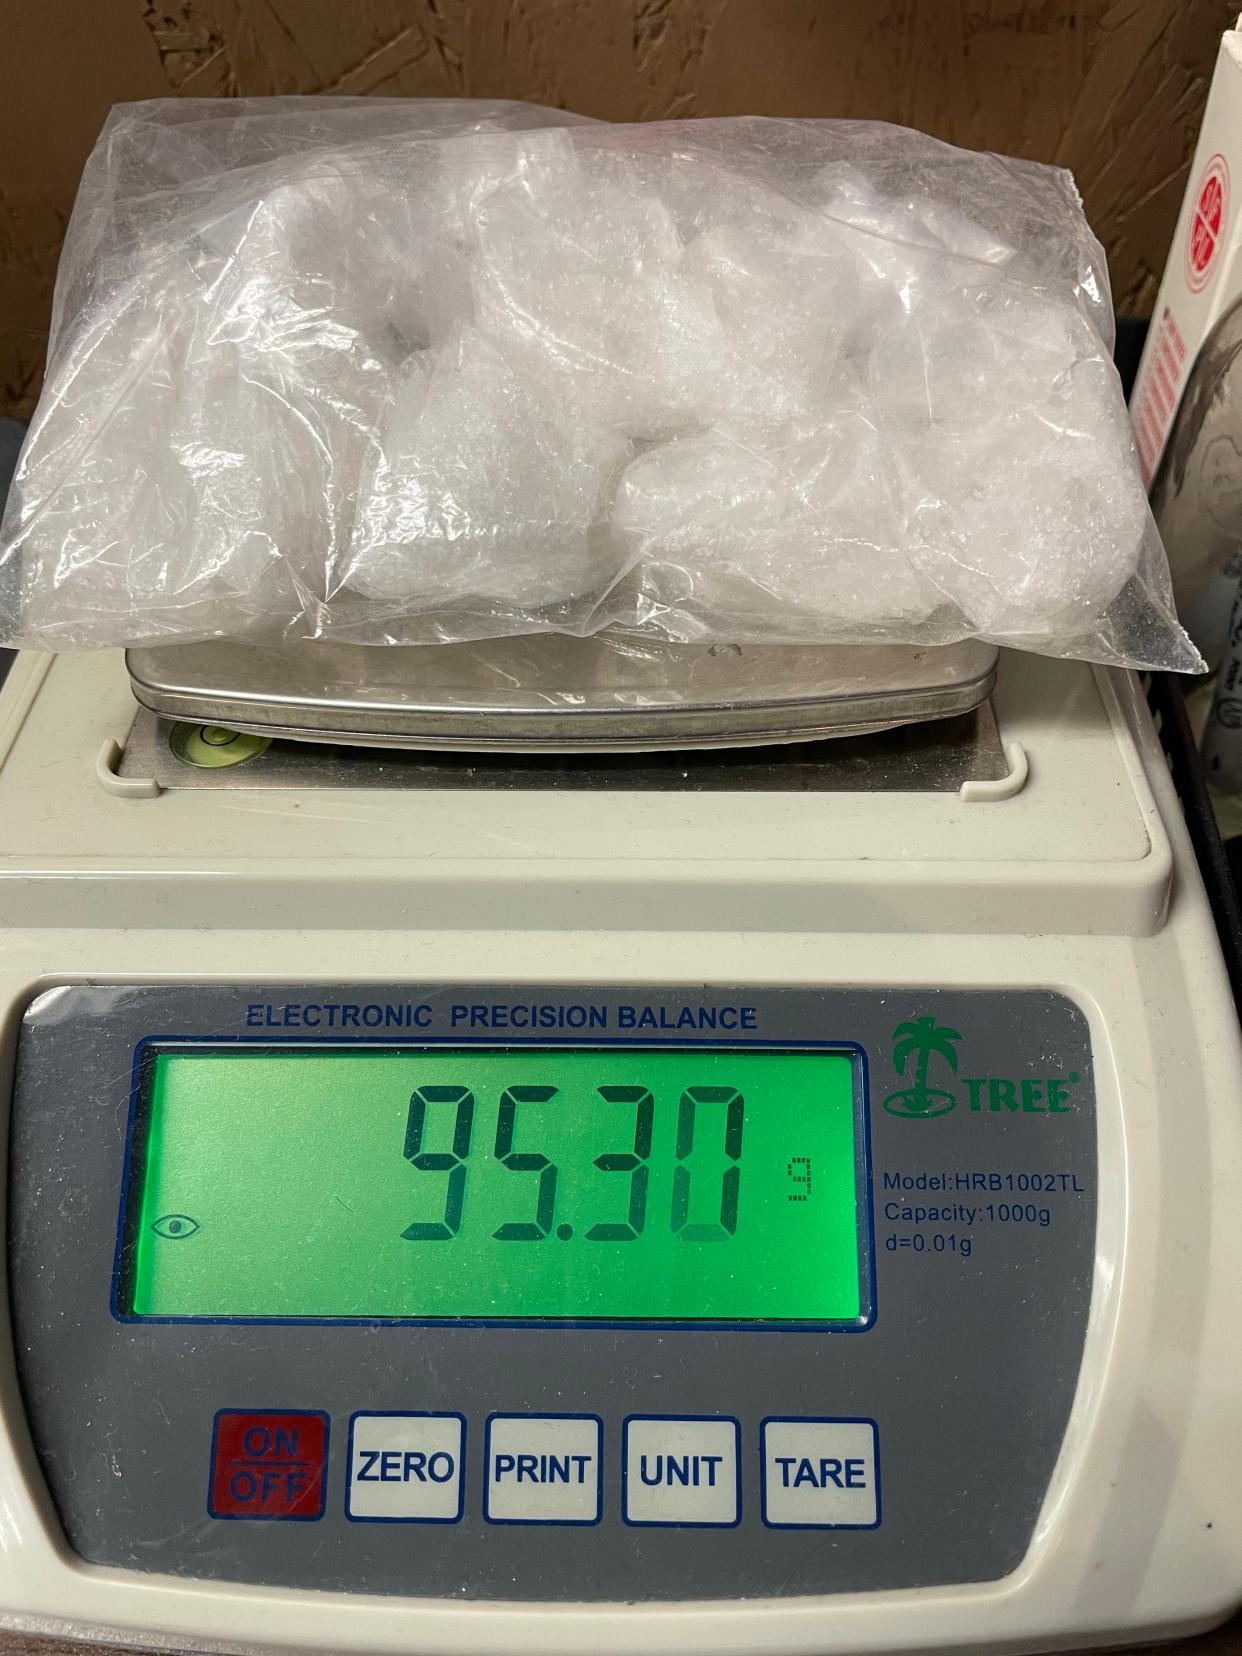 The Wayne County Drug Task Force confiscated more than 110 grams of methamphetamine during a Feb. 5, 2021, raid on a Glen Court residence.